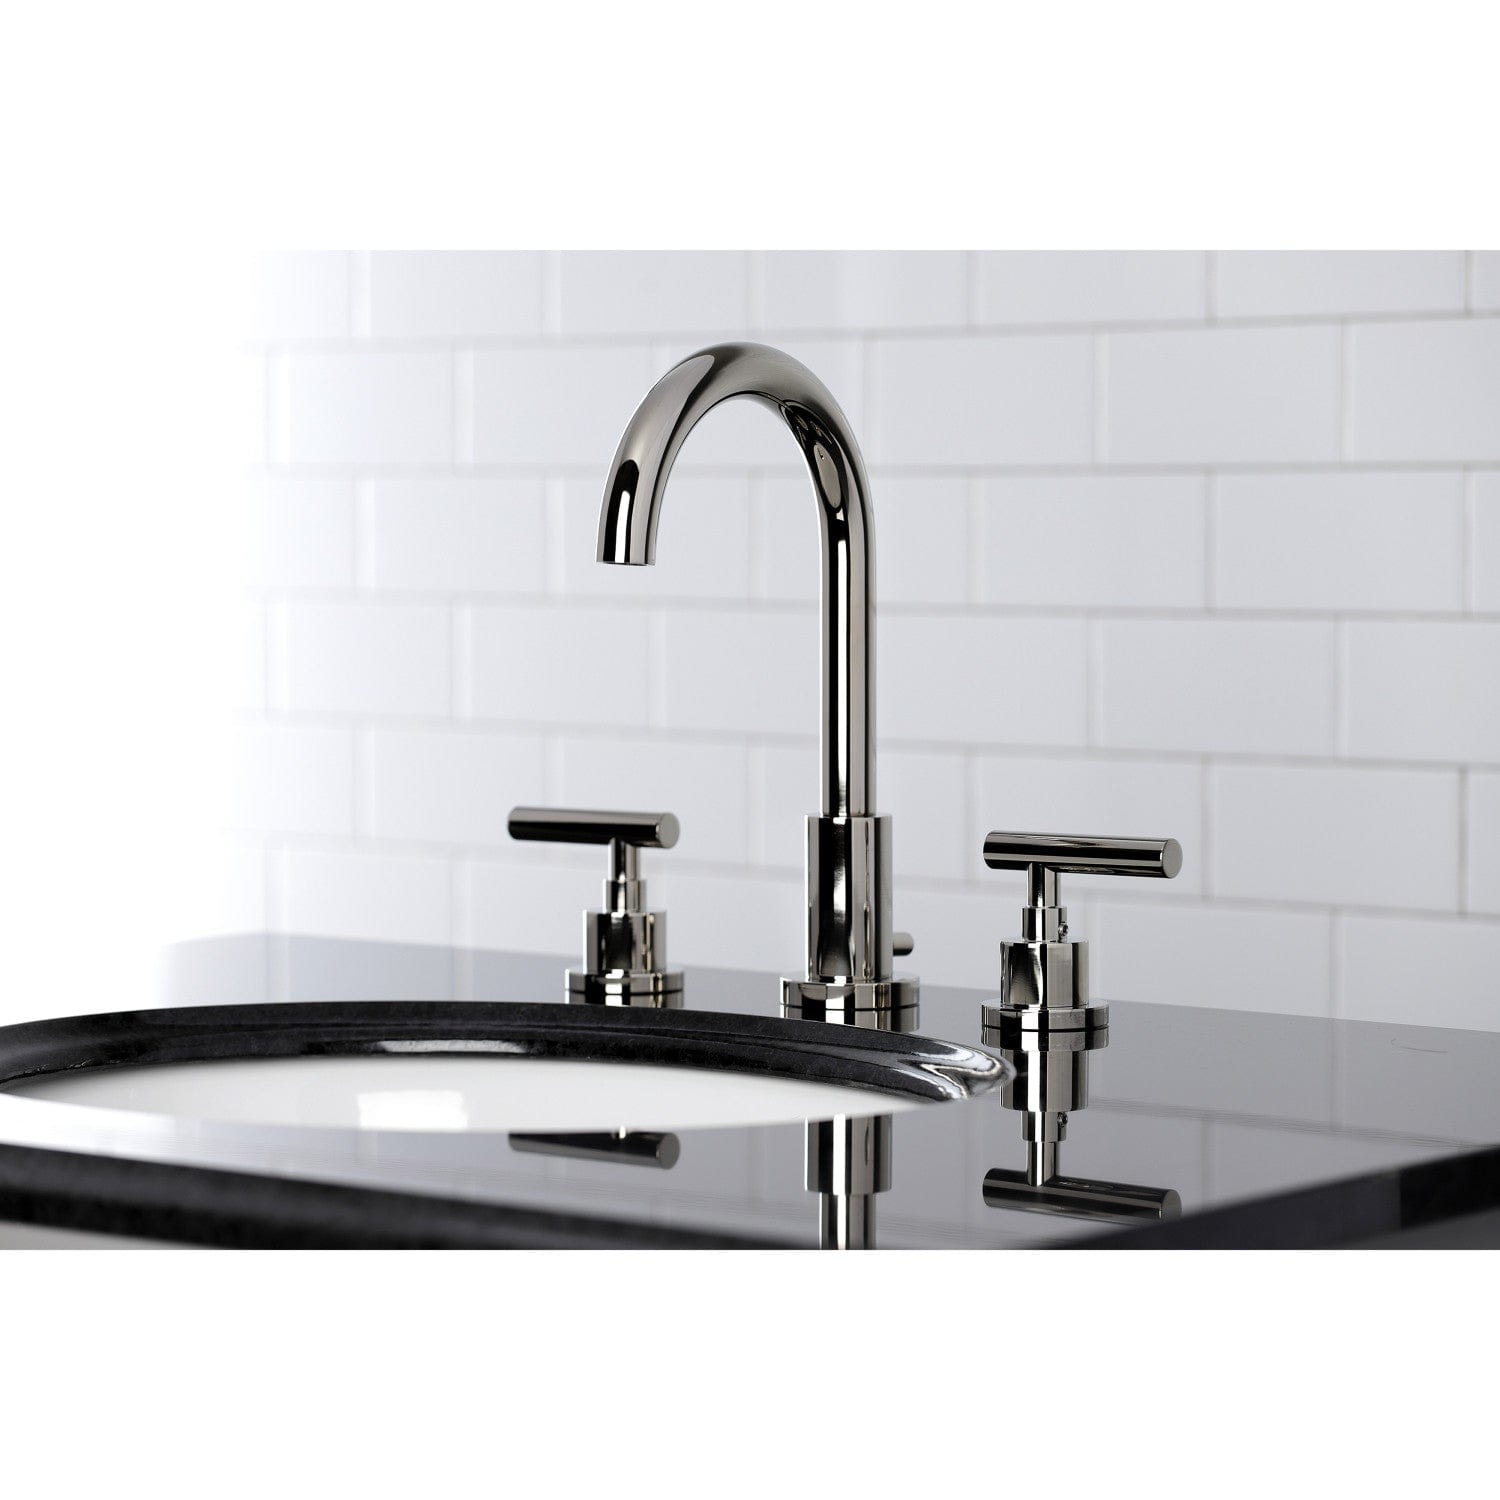 KINGSTON Brass Manhattan Widespread Bathroom Faucet with Brass Pop-Up - Polished Nickel